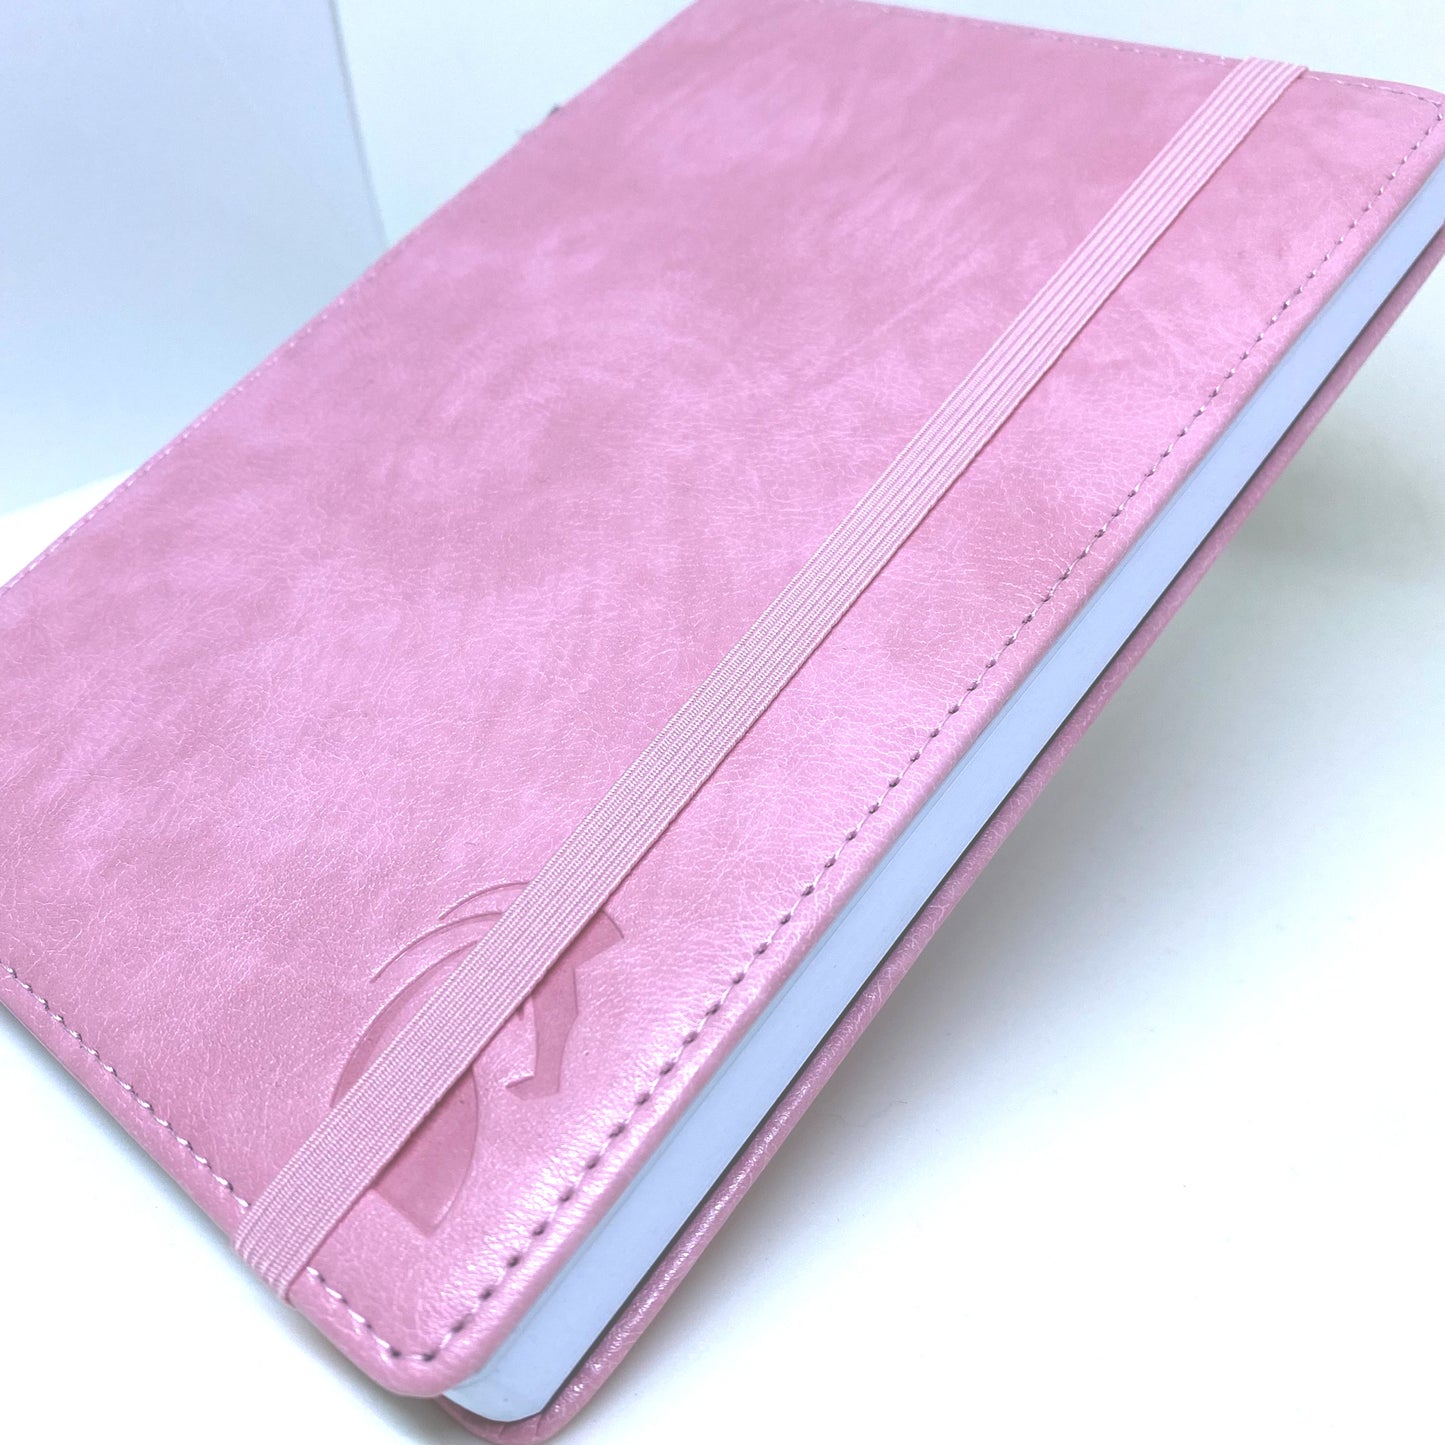 A5 Hardcover Journal Notebook - Pink Faux Leather